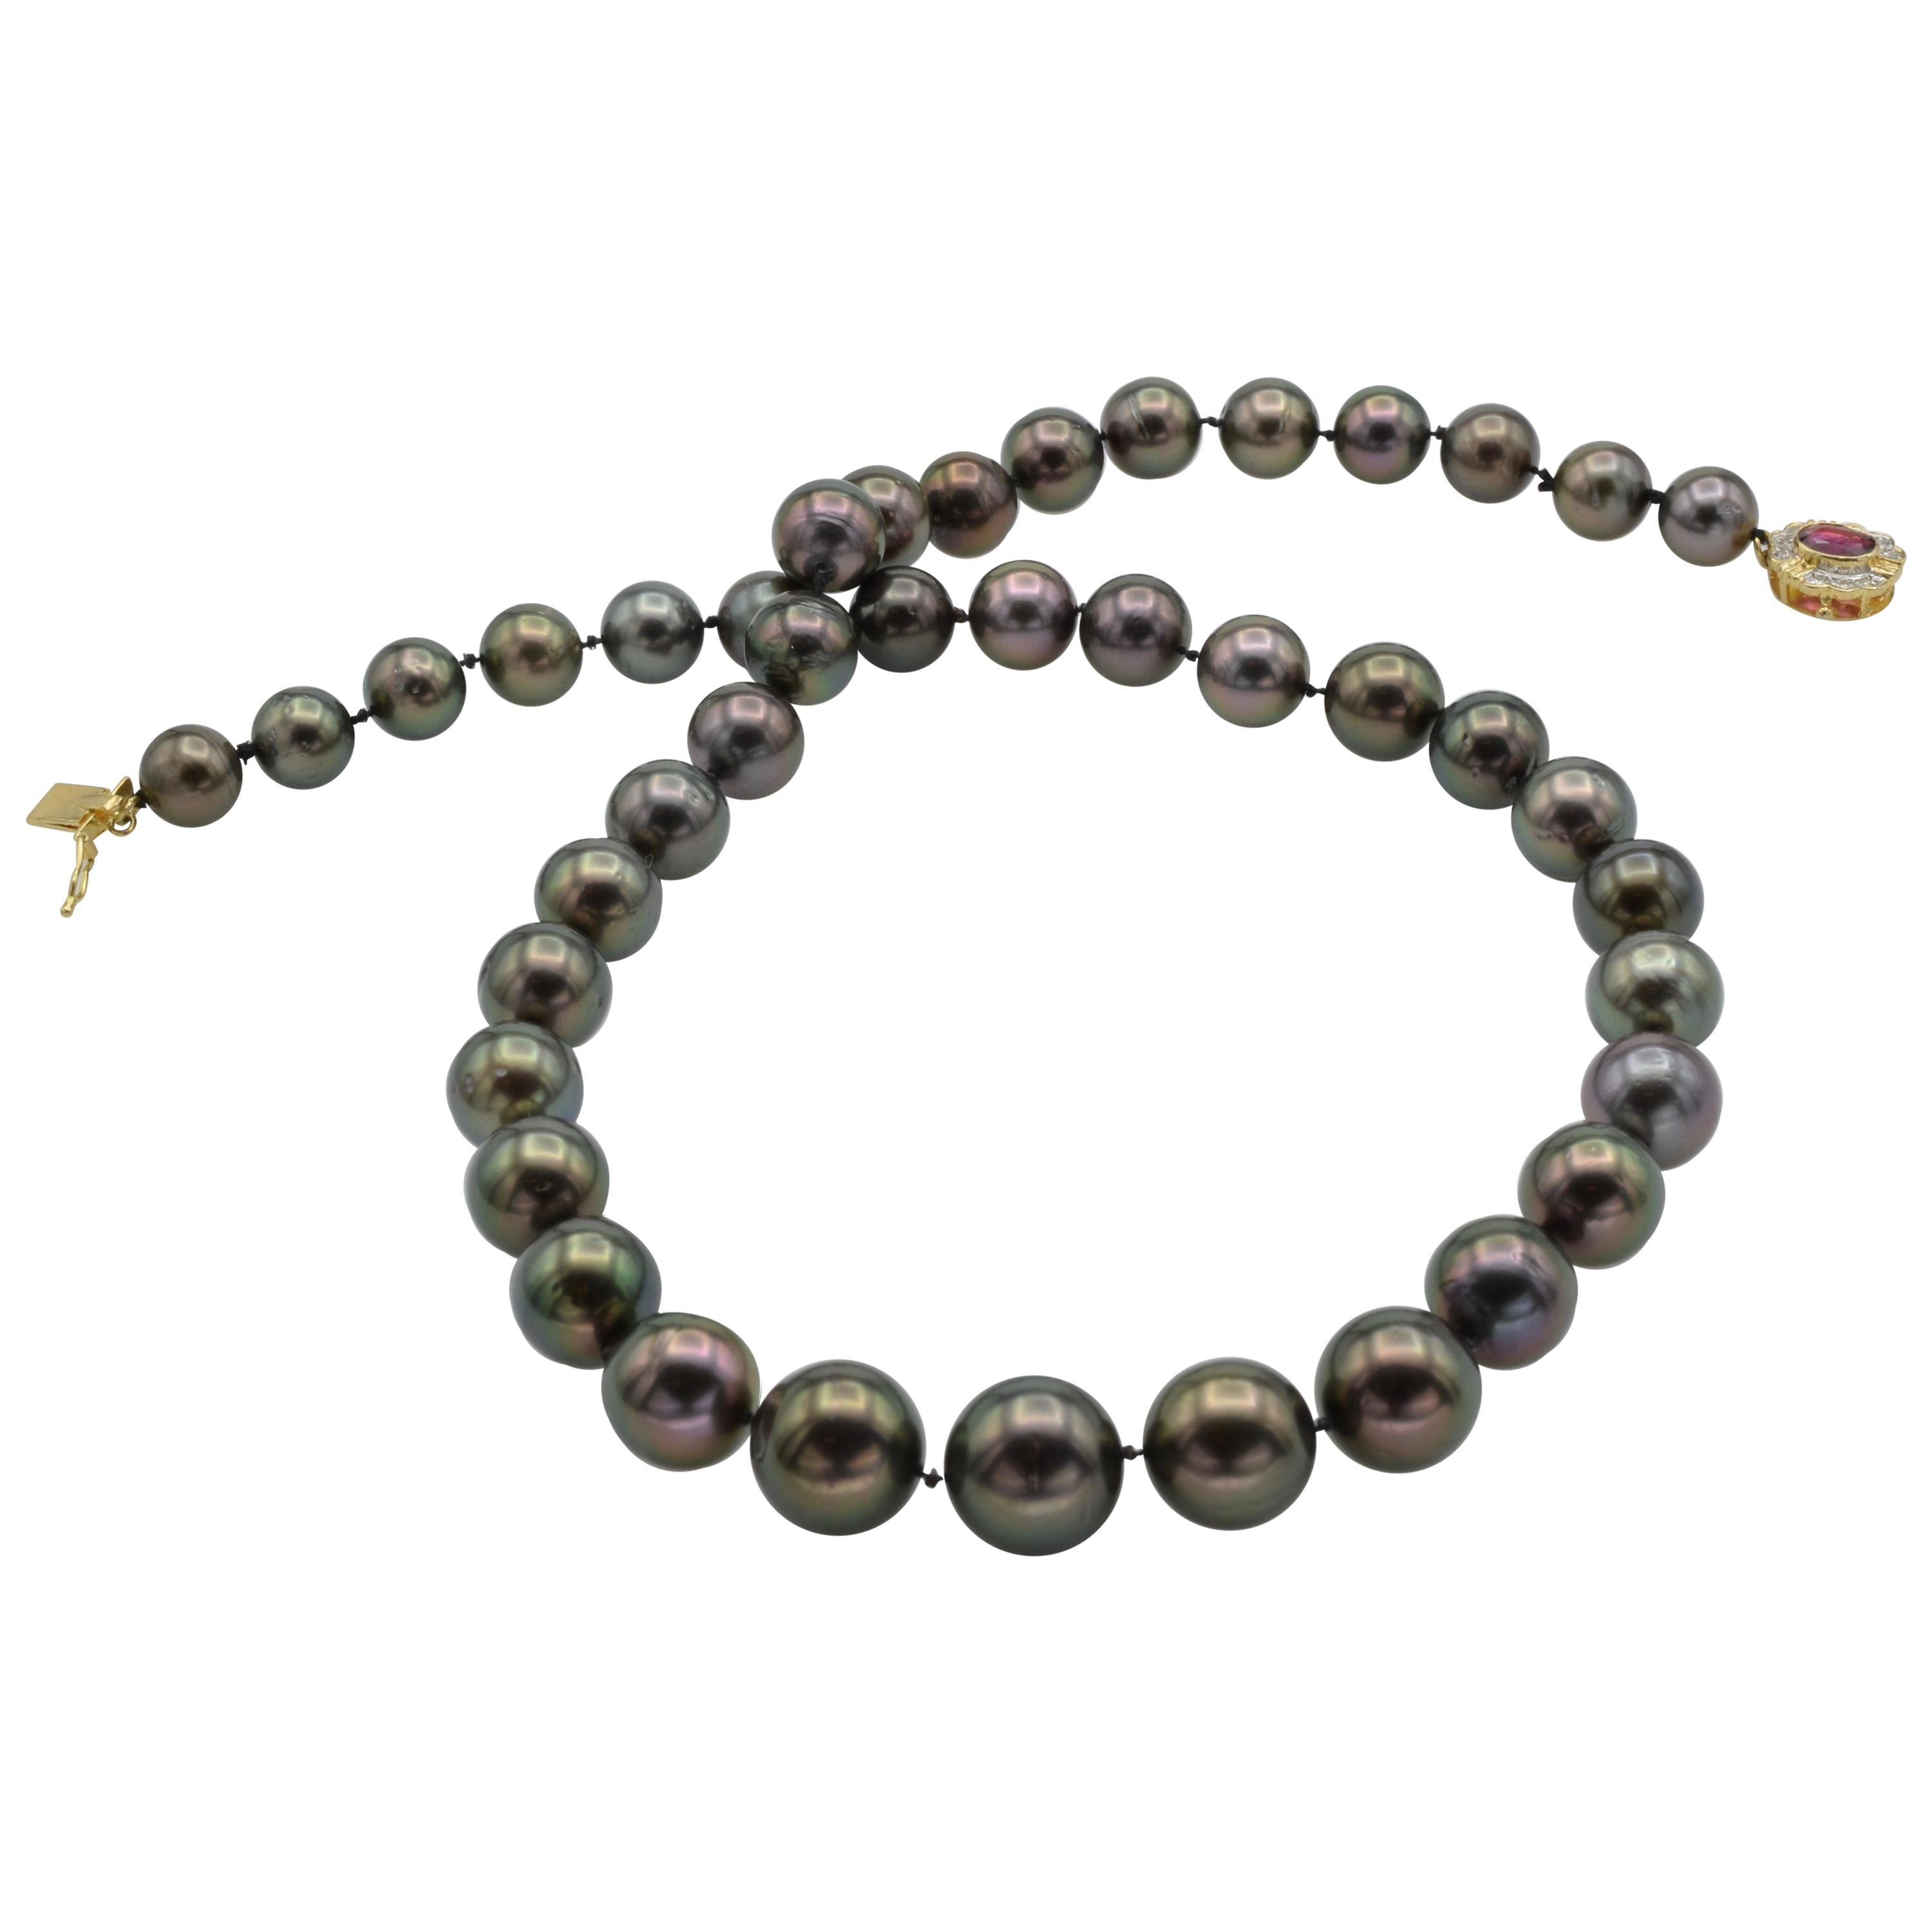 Black Tahiti Pearl Necklace with Ruby and Diamond Clasp